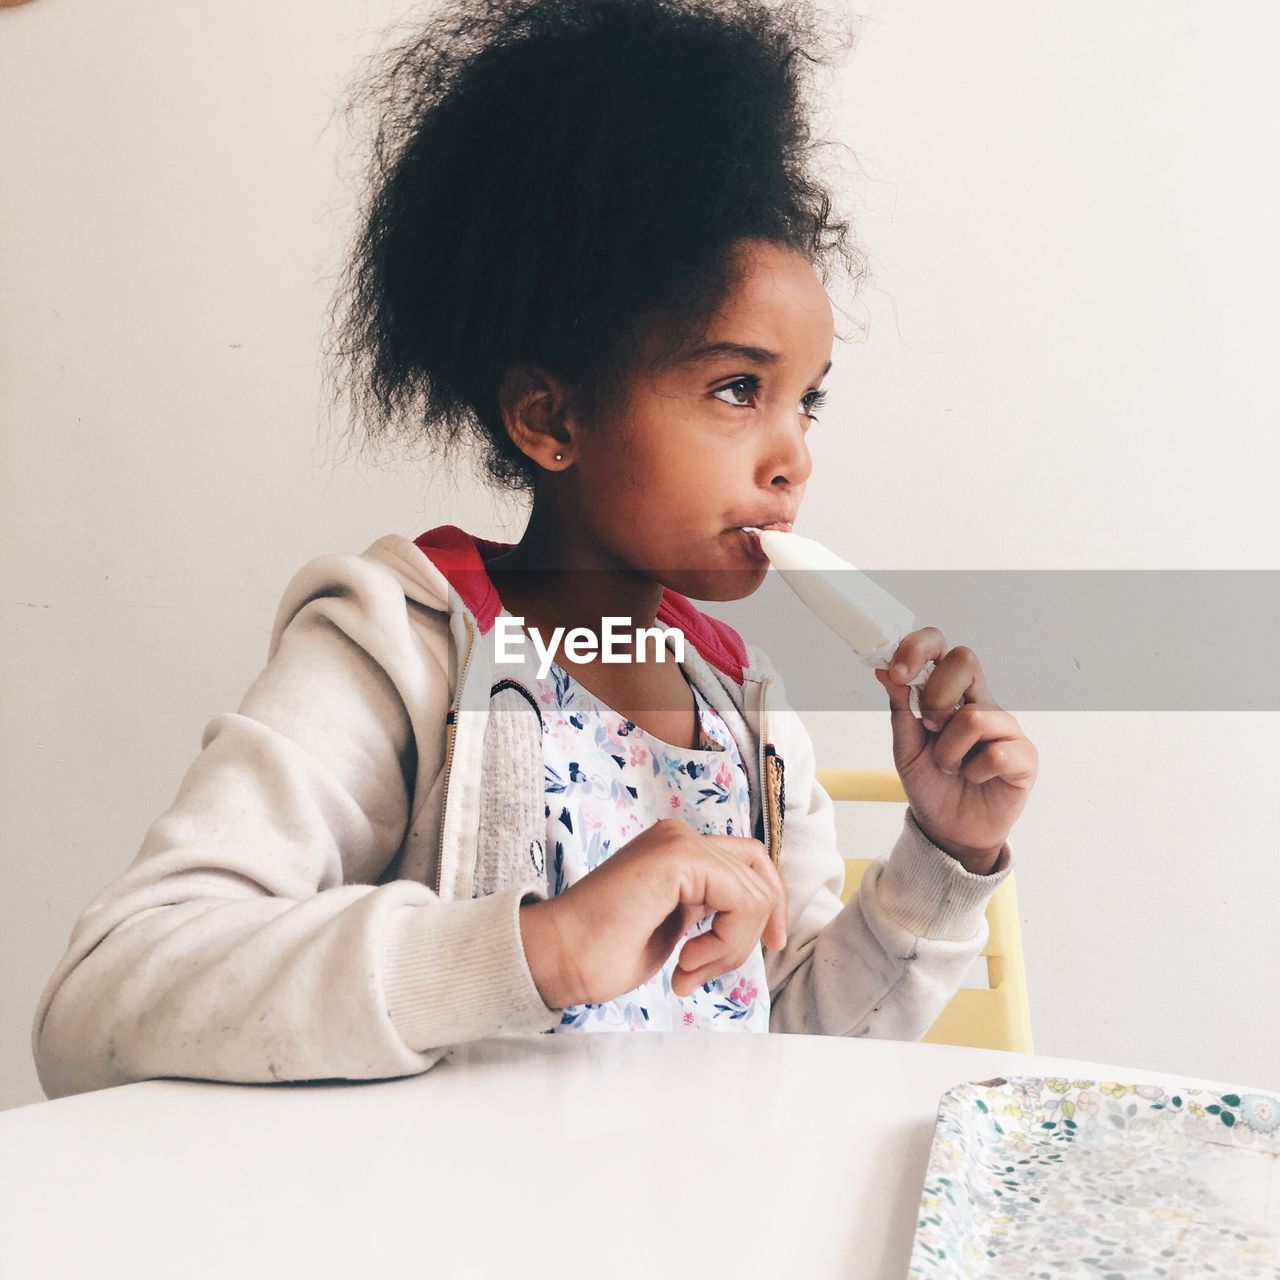 Girl eating popsicle against wall at home